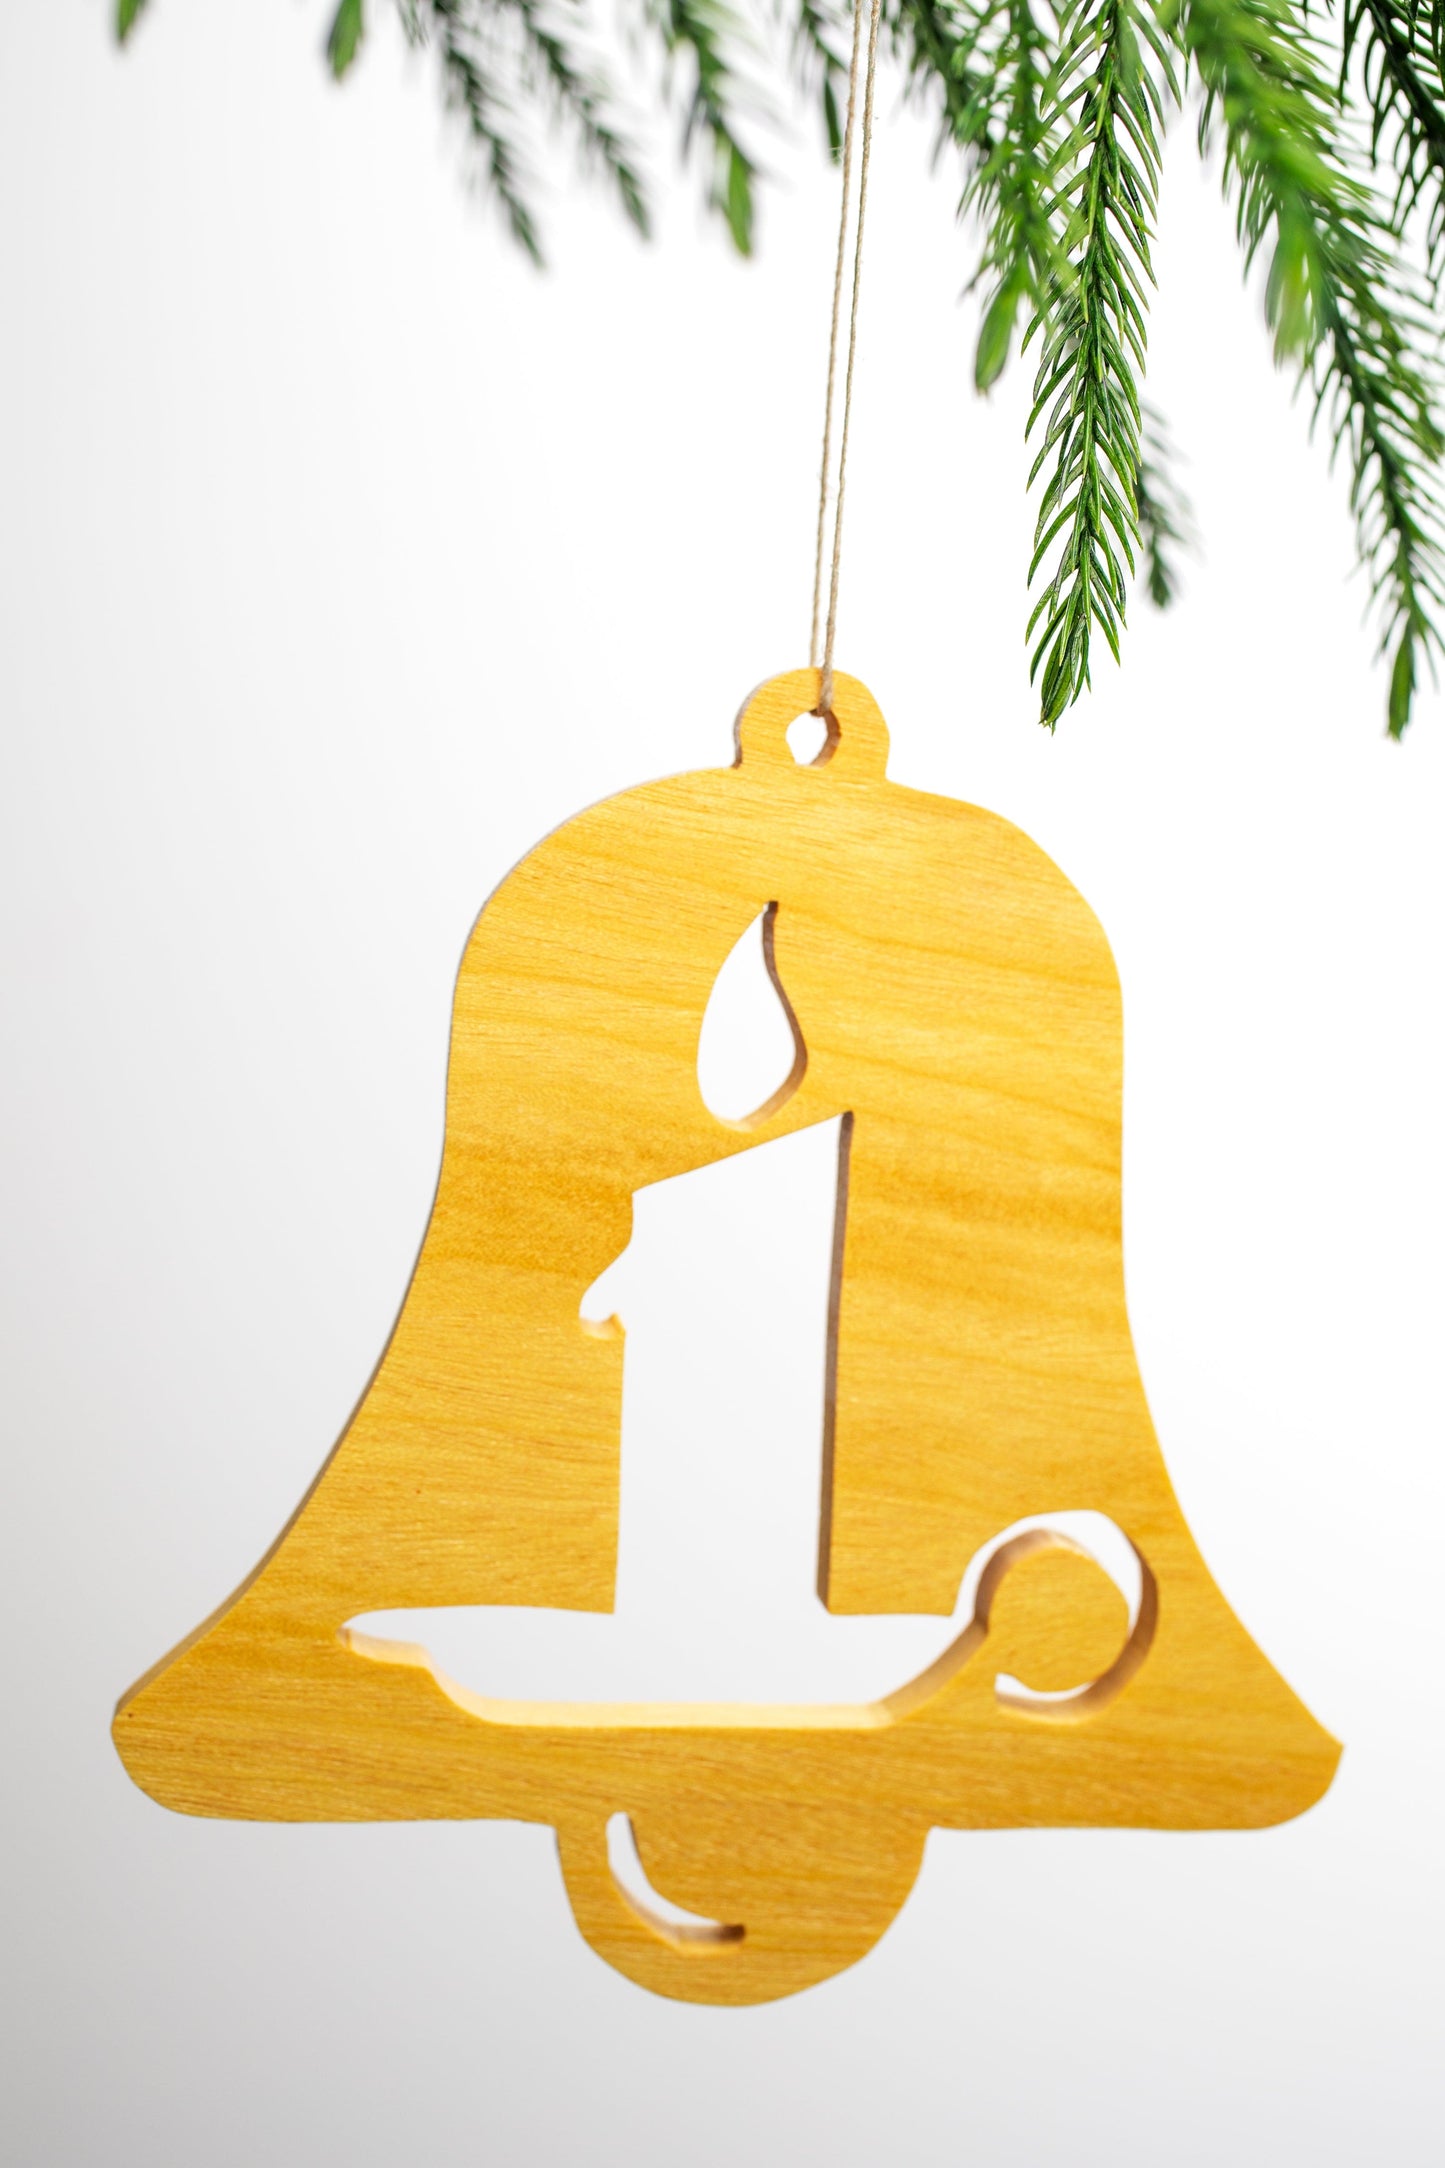 The Carpentry Shop Co. Solid Wood Handmade Holiday Ornaments